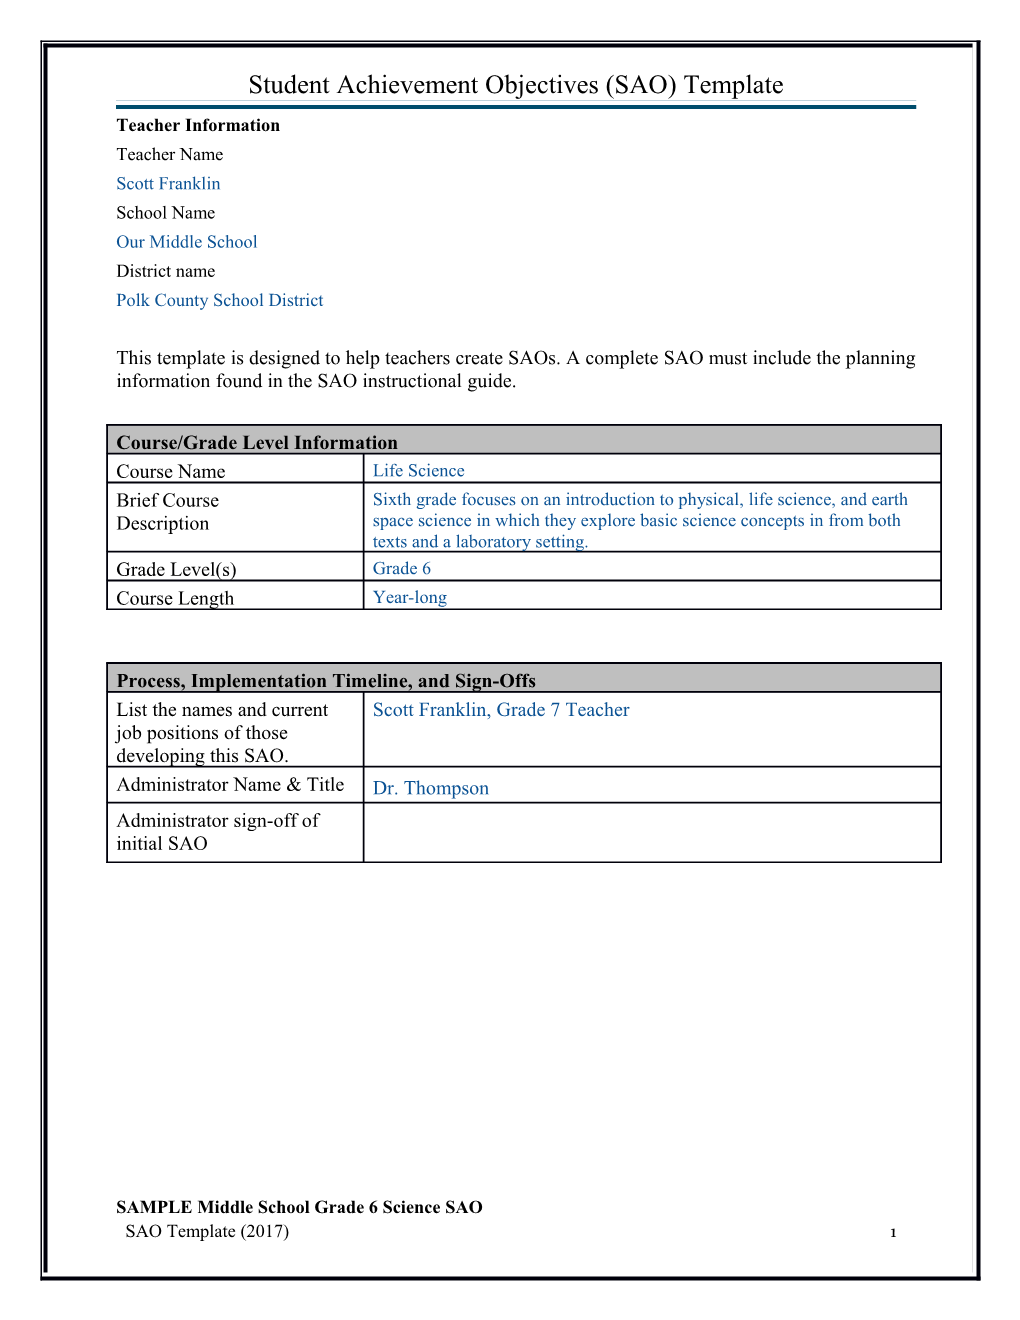 Student Achievement Objectives (SAO) Template